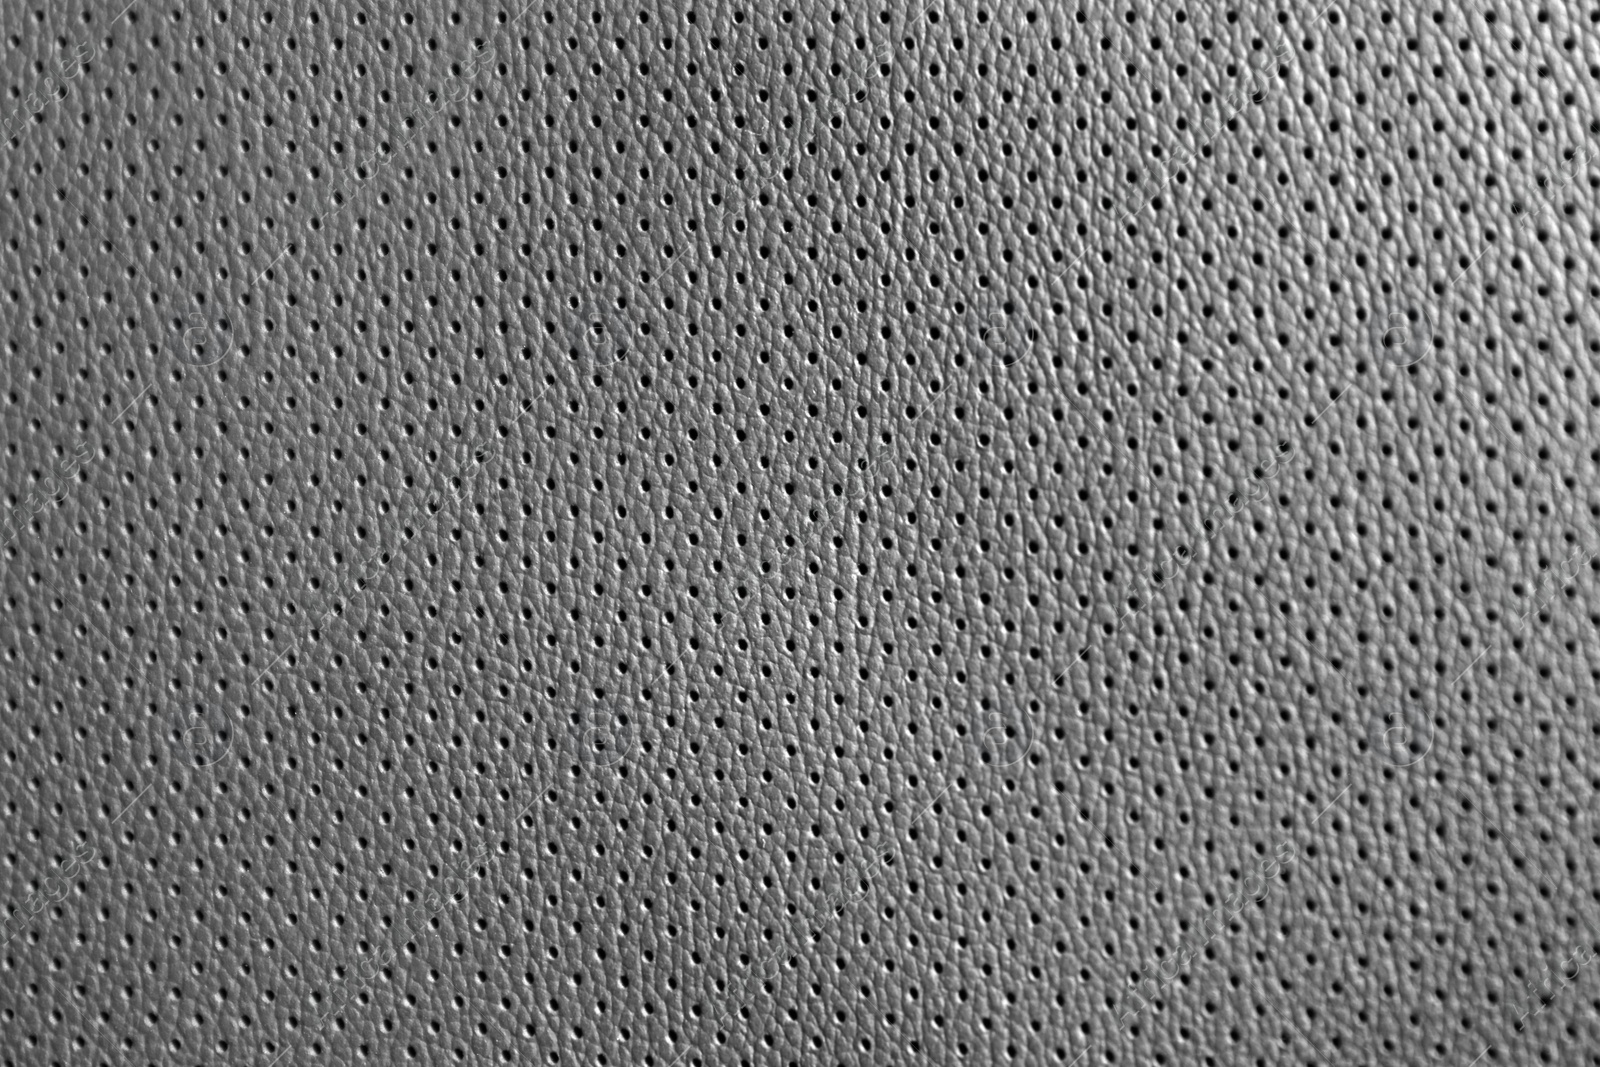 Photo of Textured grey leather as background, closeup view